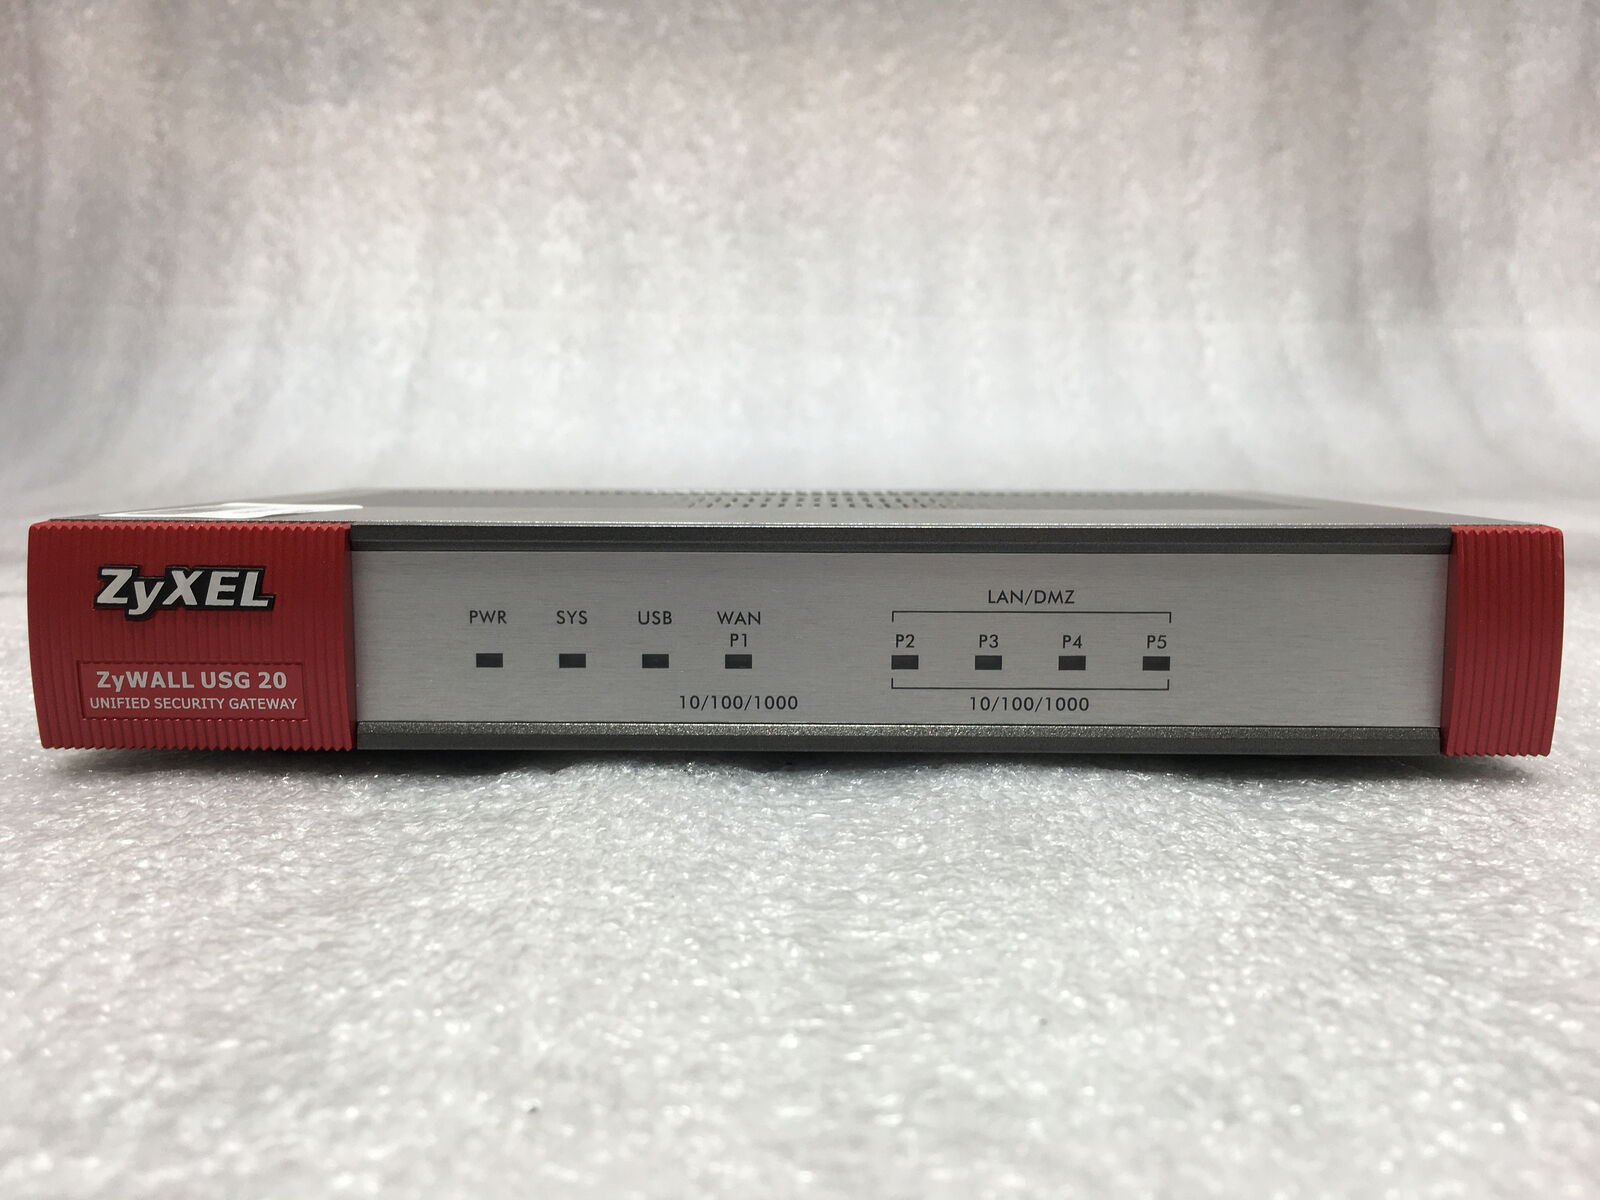 ZyXel Zywall USG 20 Unified Security Gateway with NO Power Supply Included